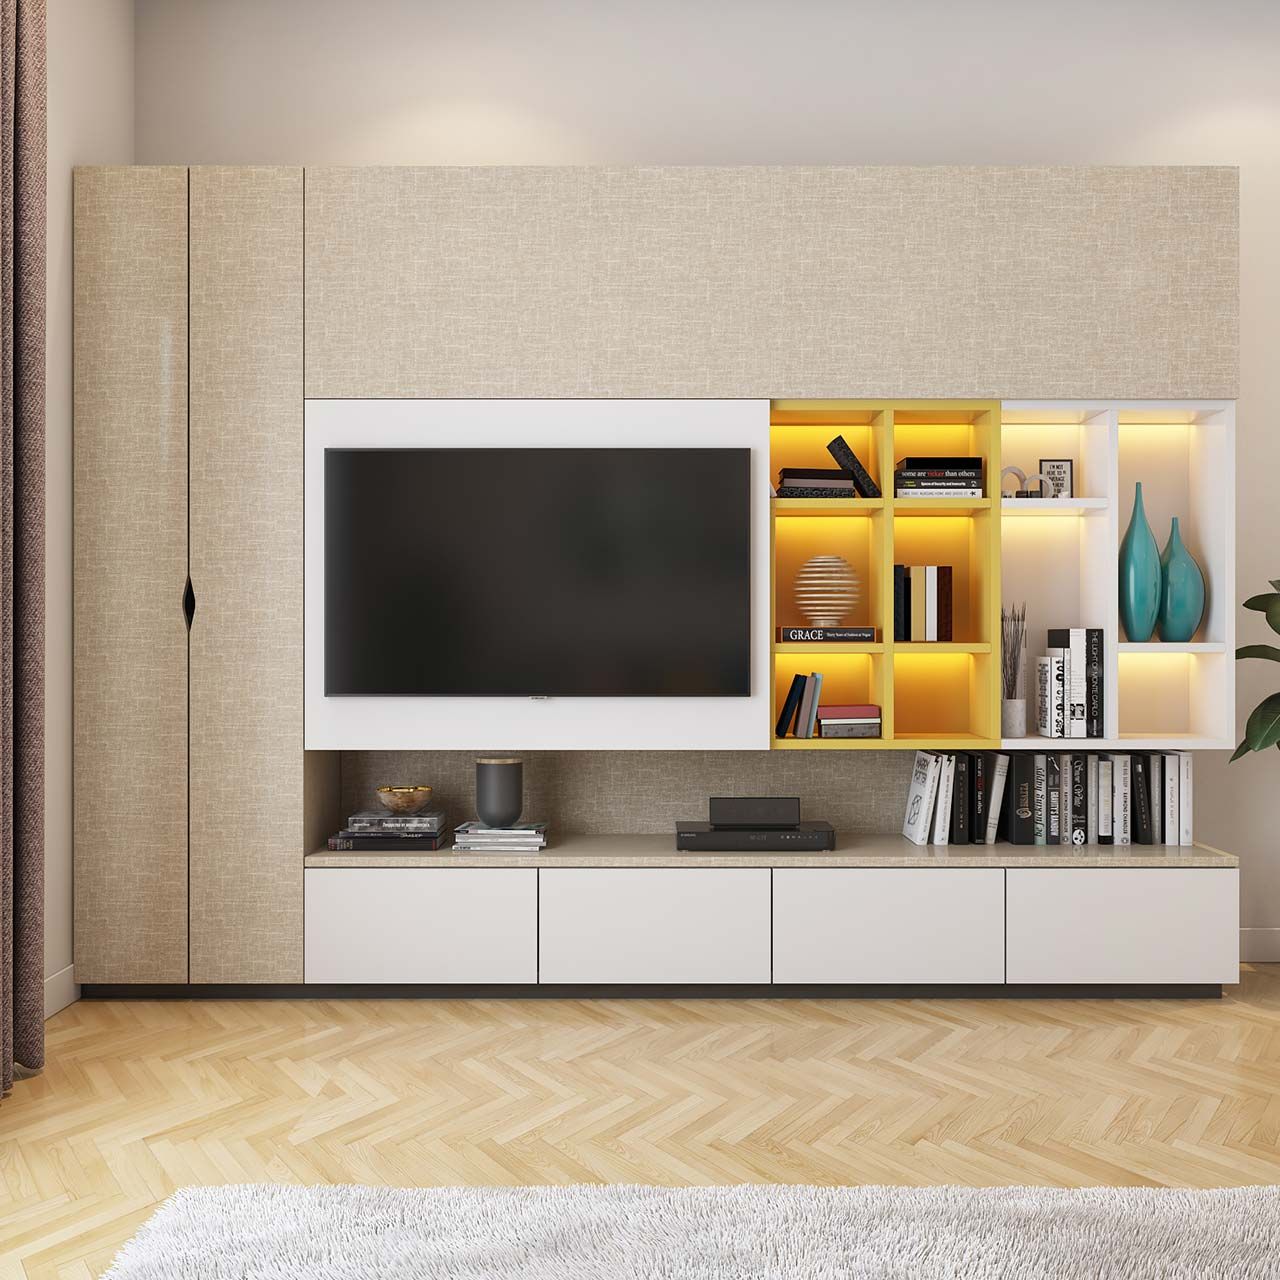 Modern Tv Unit Design Ideas For Your Home | Designcafe In Dual Use Storage Cabinet Tv Stands (View 16 of 16)